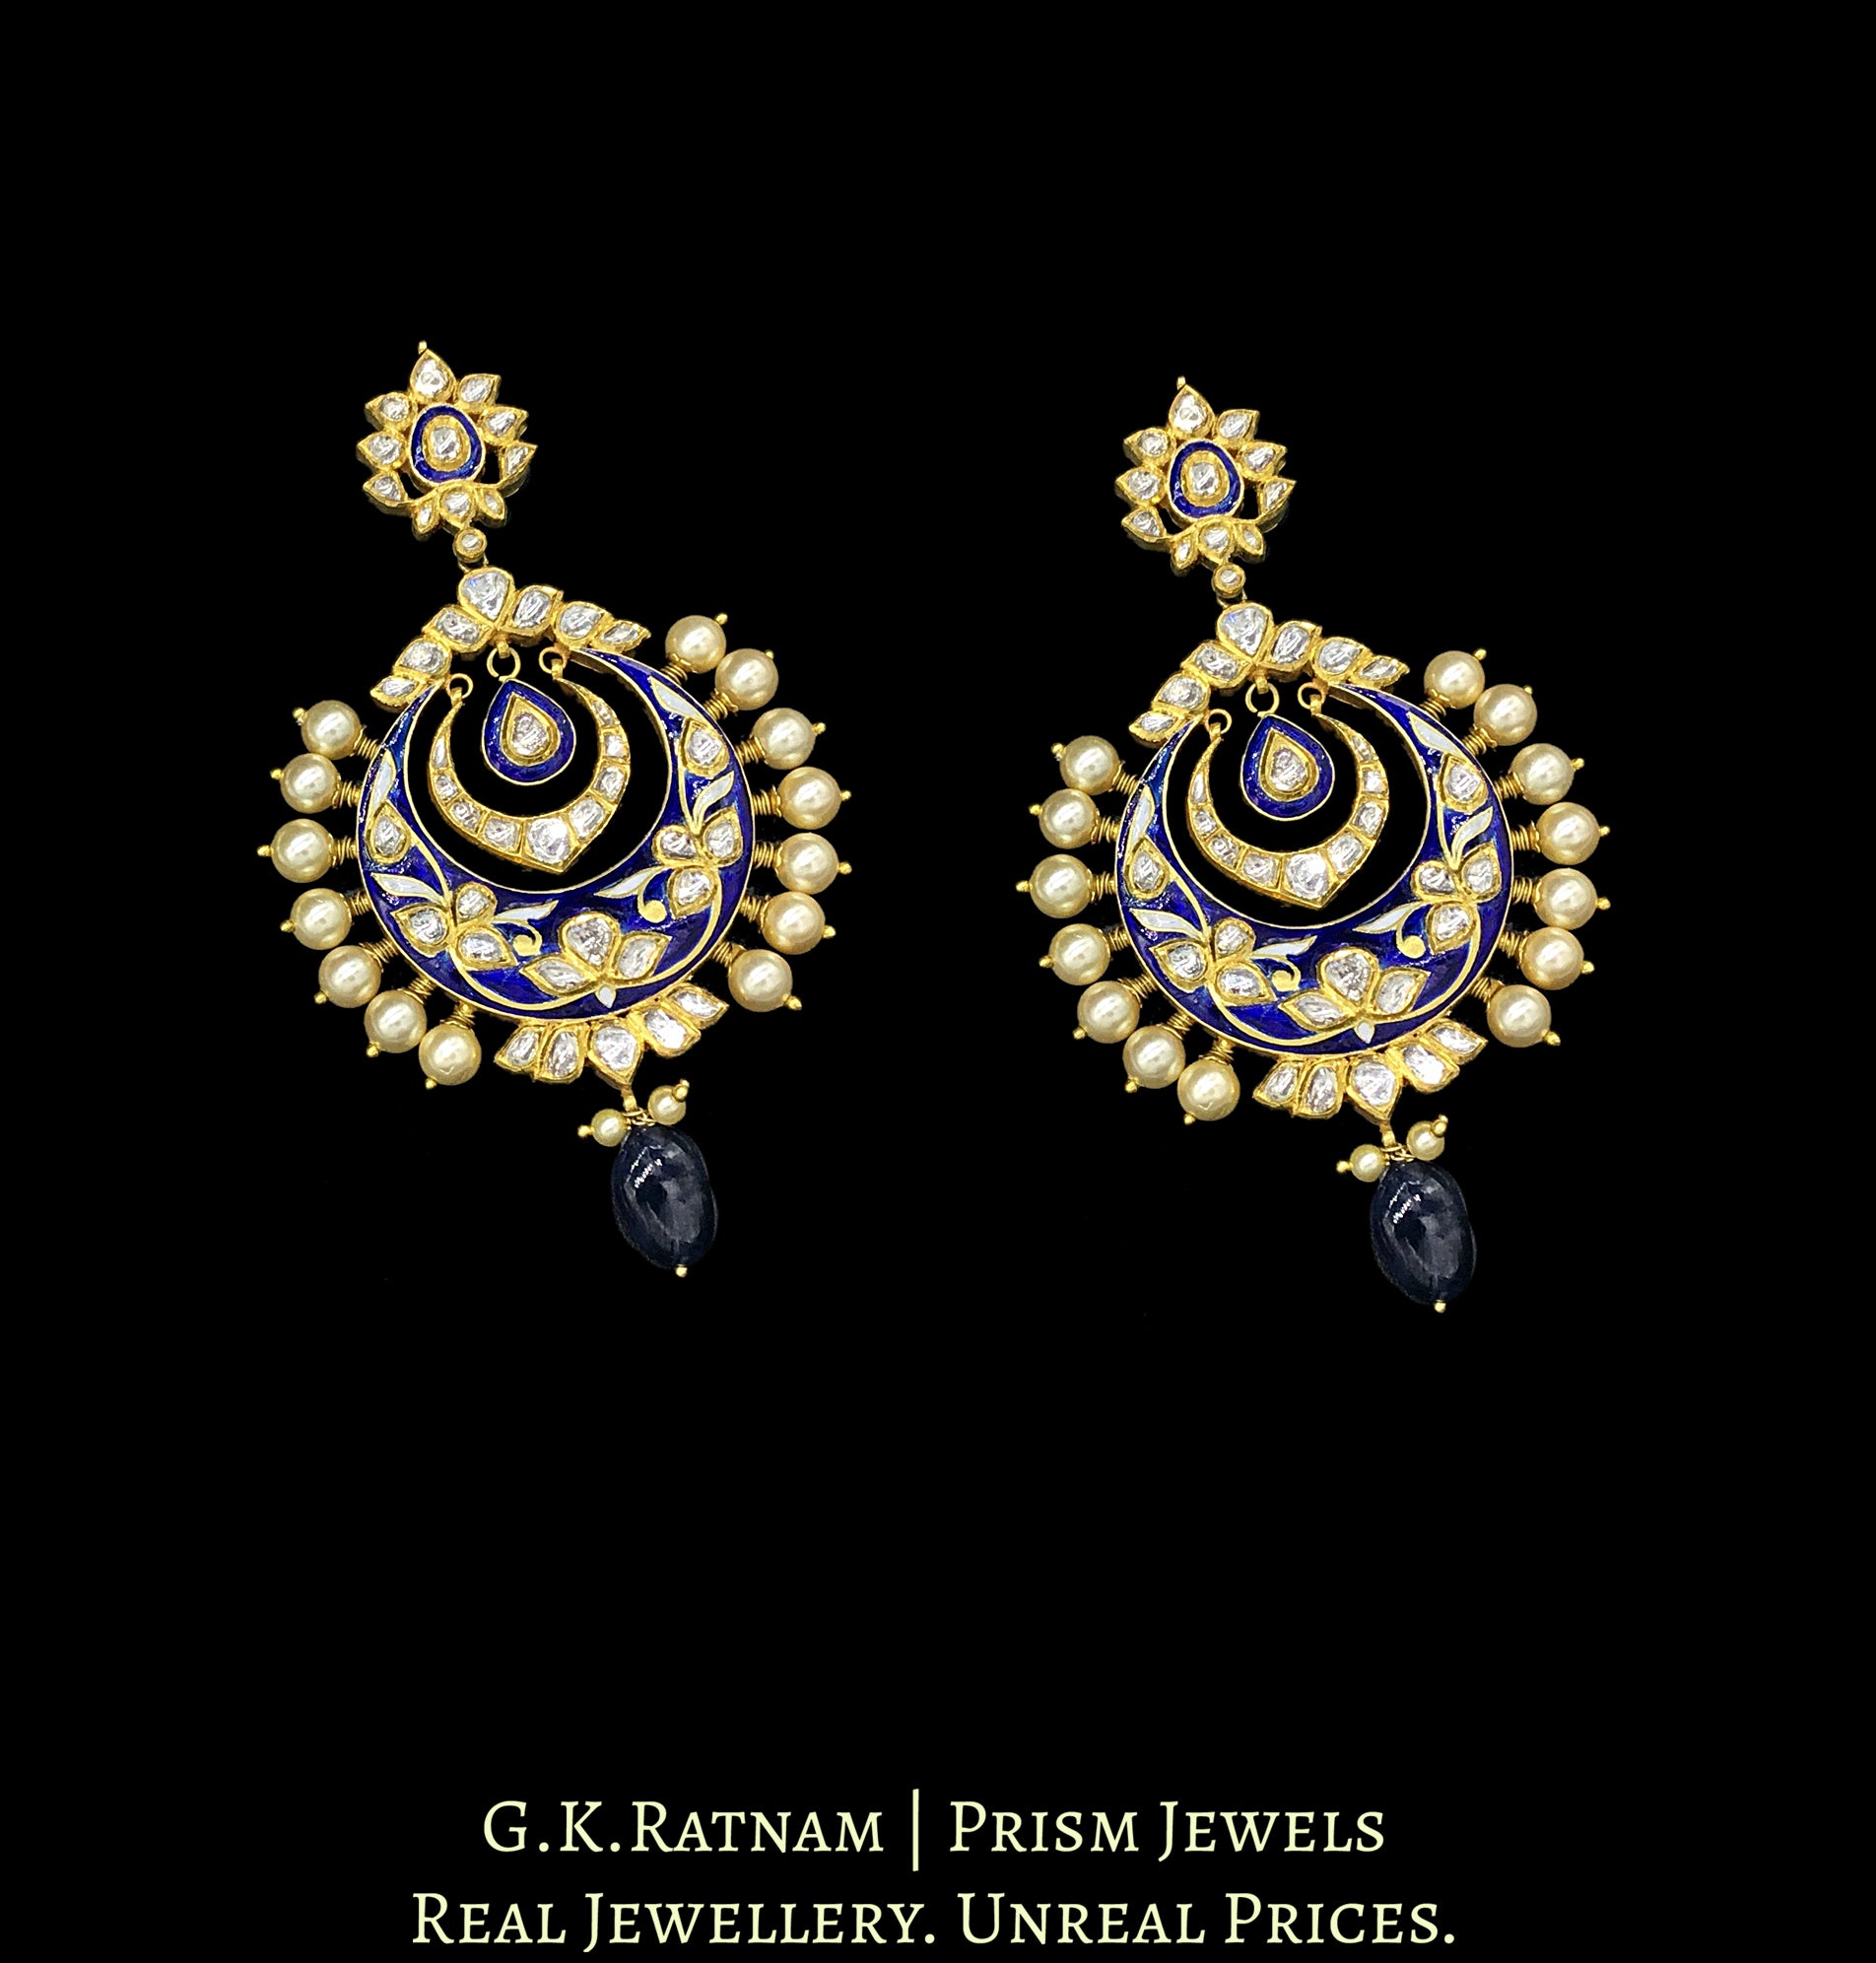 18k Gold and Diamond Polki Royal Blue enamel Chand Bali Earring Pair with pearl spikes - G. K. Ratnam